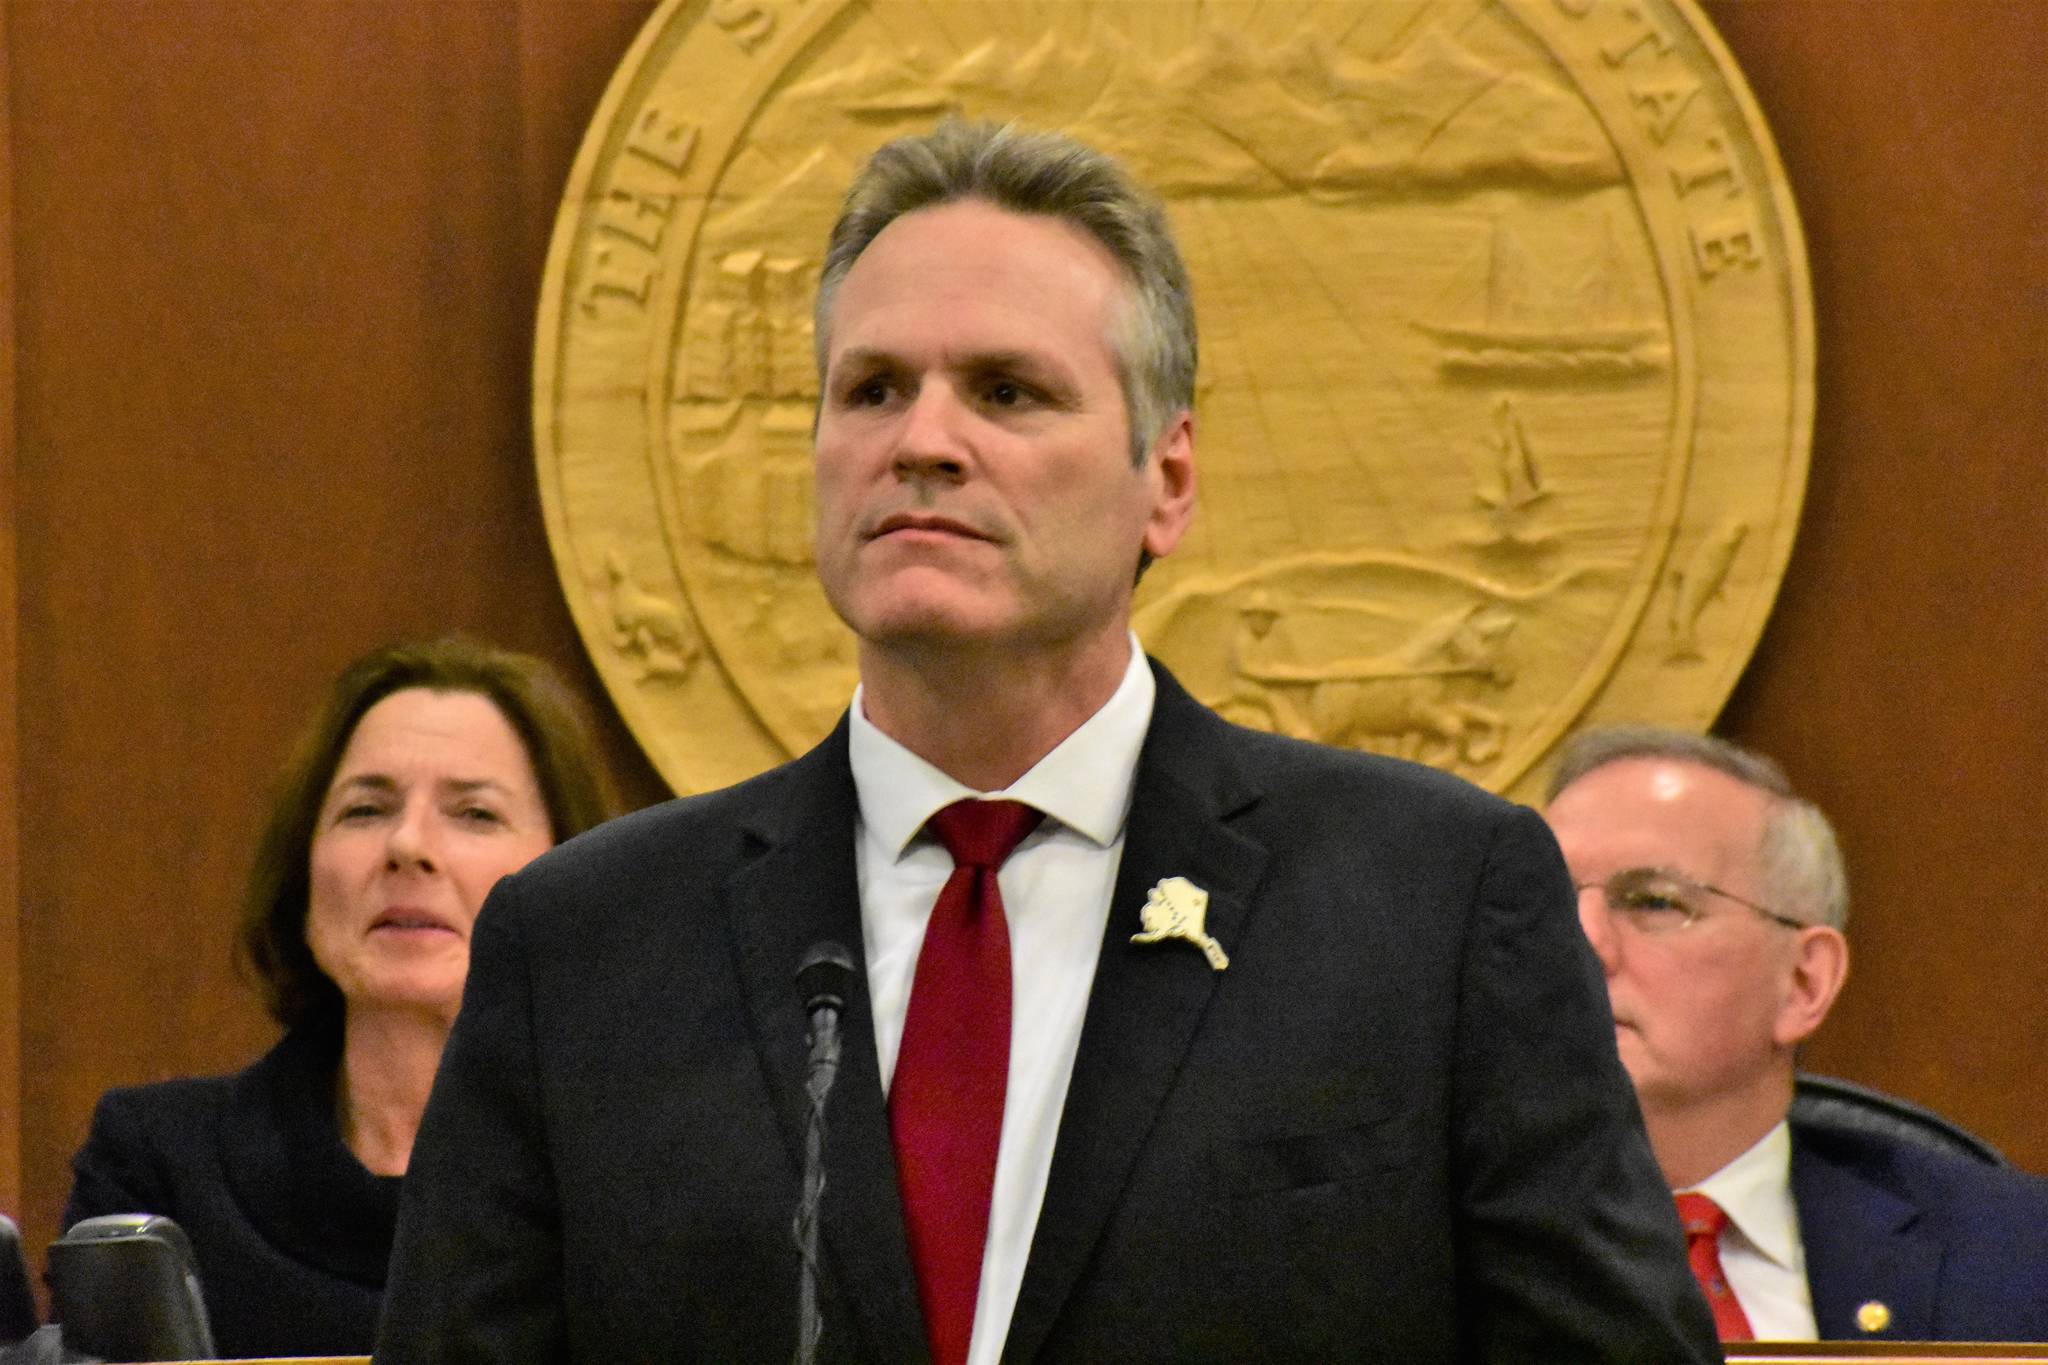 Gov. Mike Dunleavy gives his State of the State address before a joint session of the Alaska Legislature on Monday, Jan. 27, 2020. (Peter Segall | Juneau Empire)